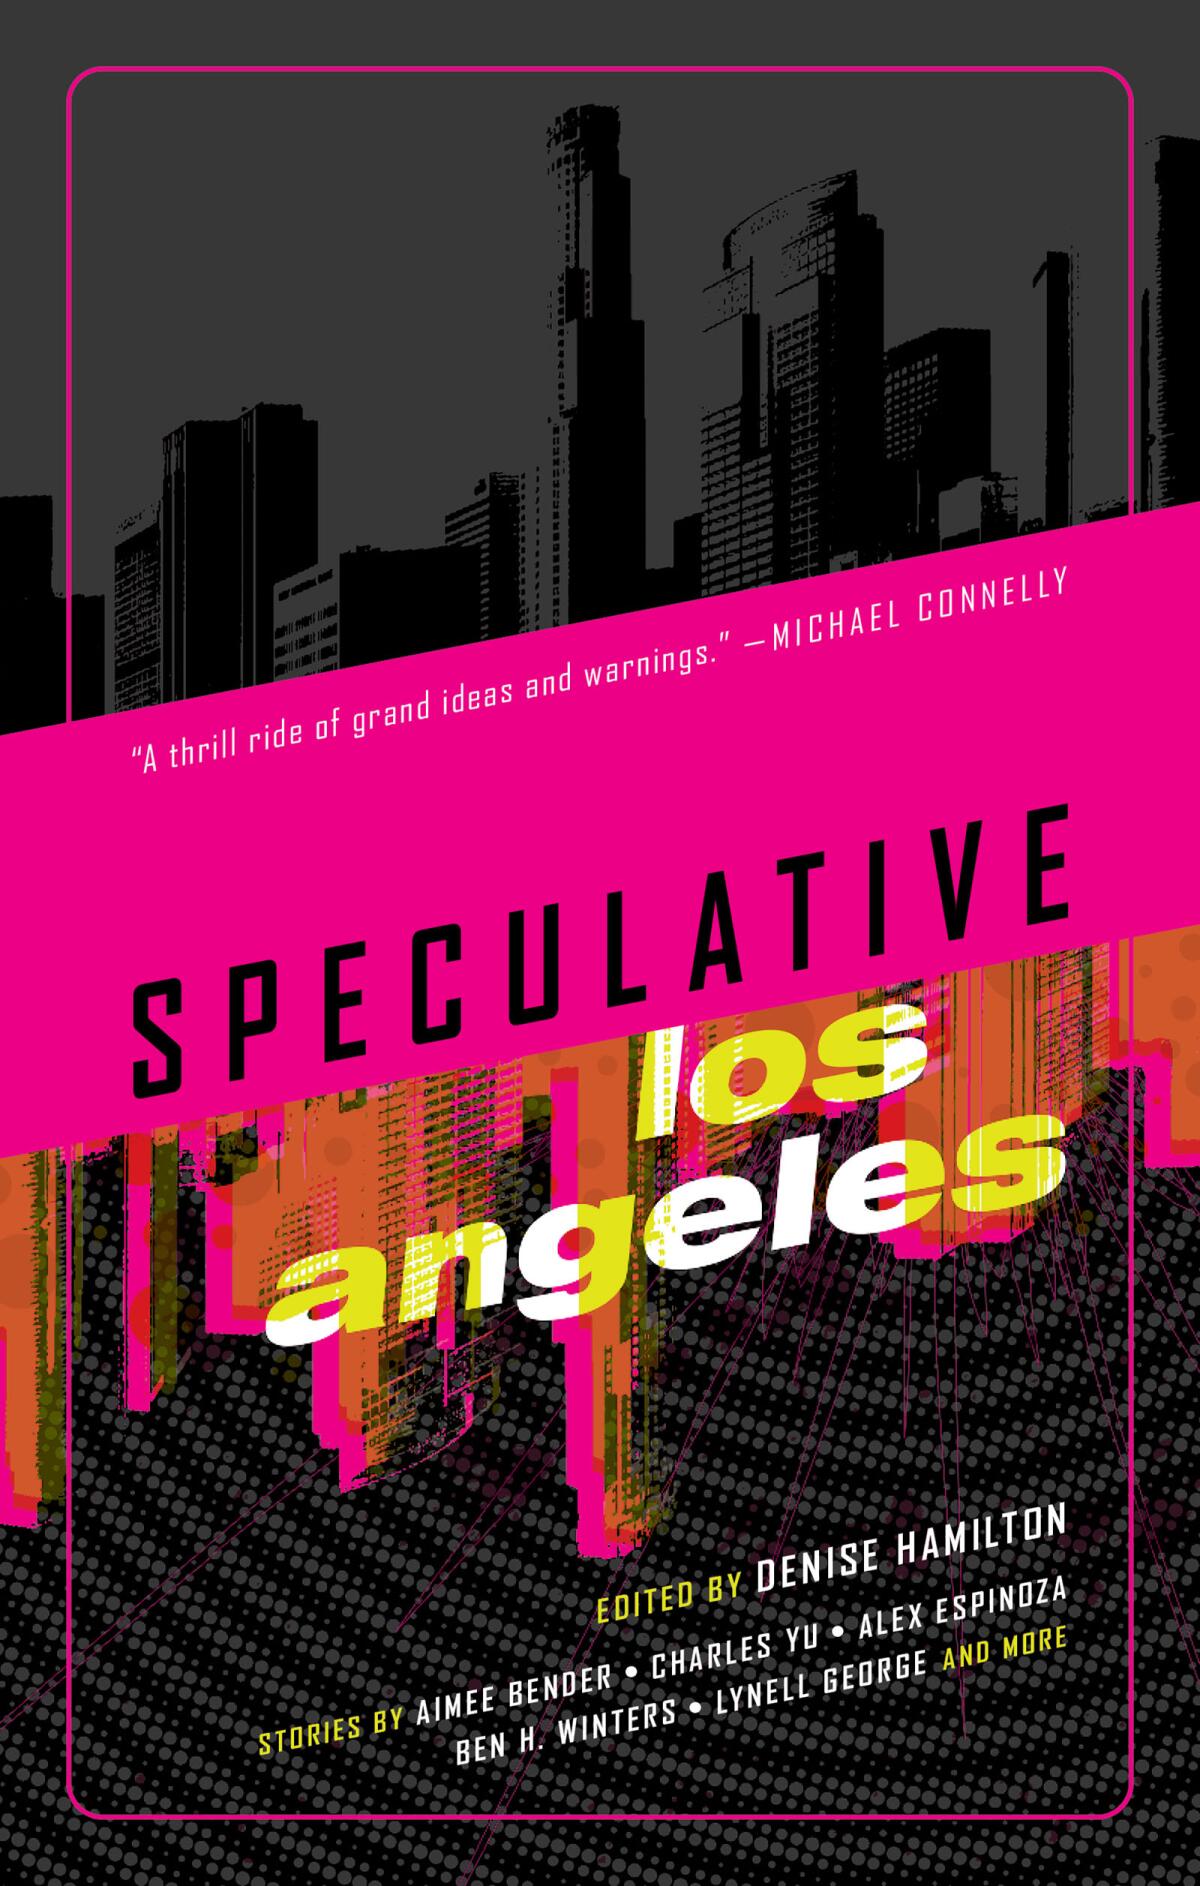 'Speculative Los Angeles," edited by Denise Hamilton